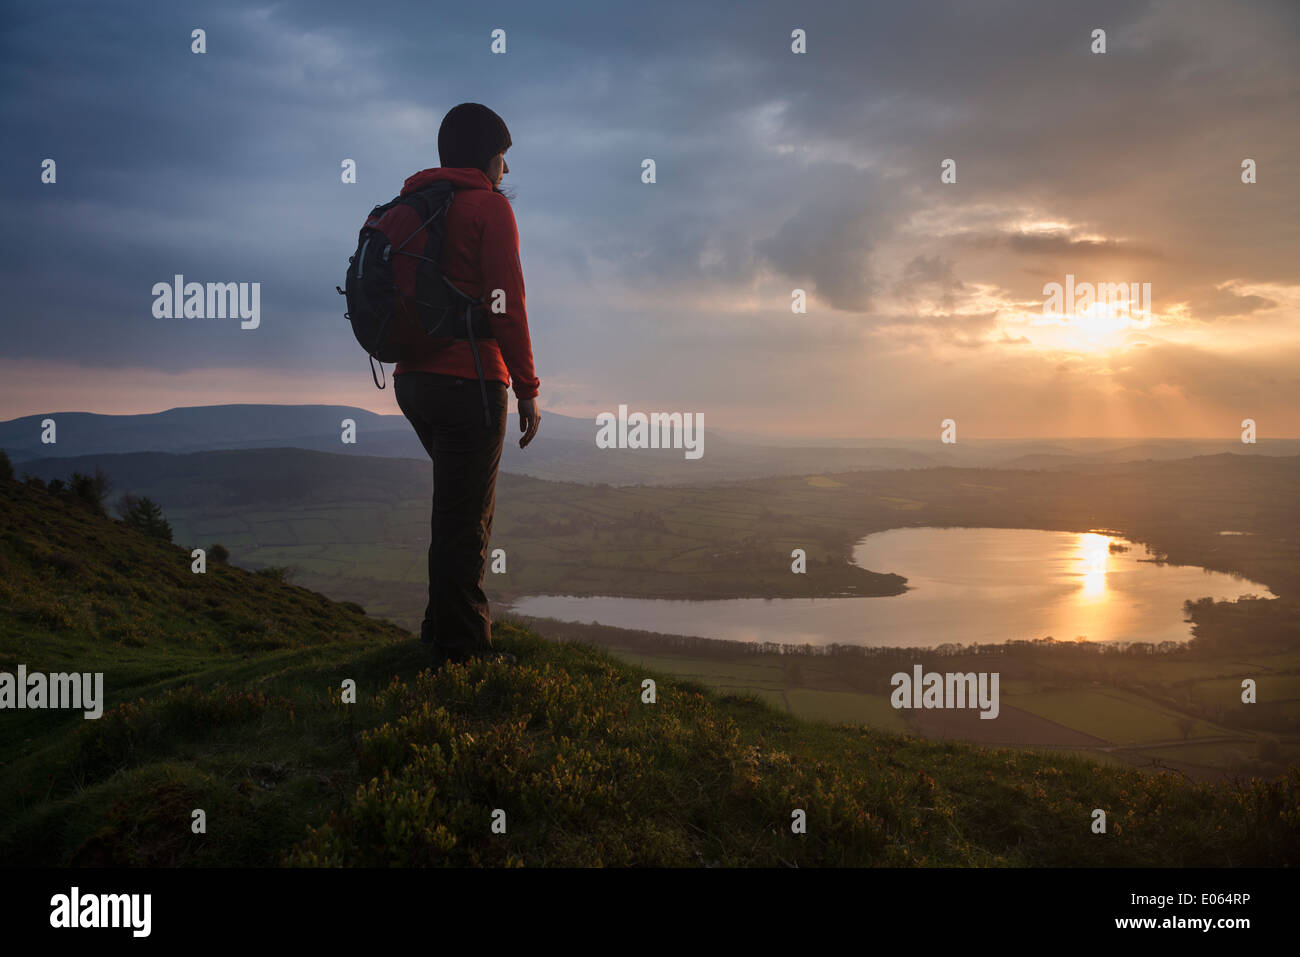 Female hiker takes in view of Llangorse lake from Mynydd Llangorse, Black Mountains, Brecon Beacons national park, Wales Stock Photo